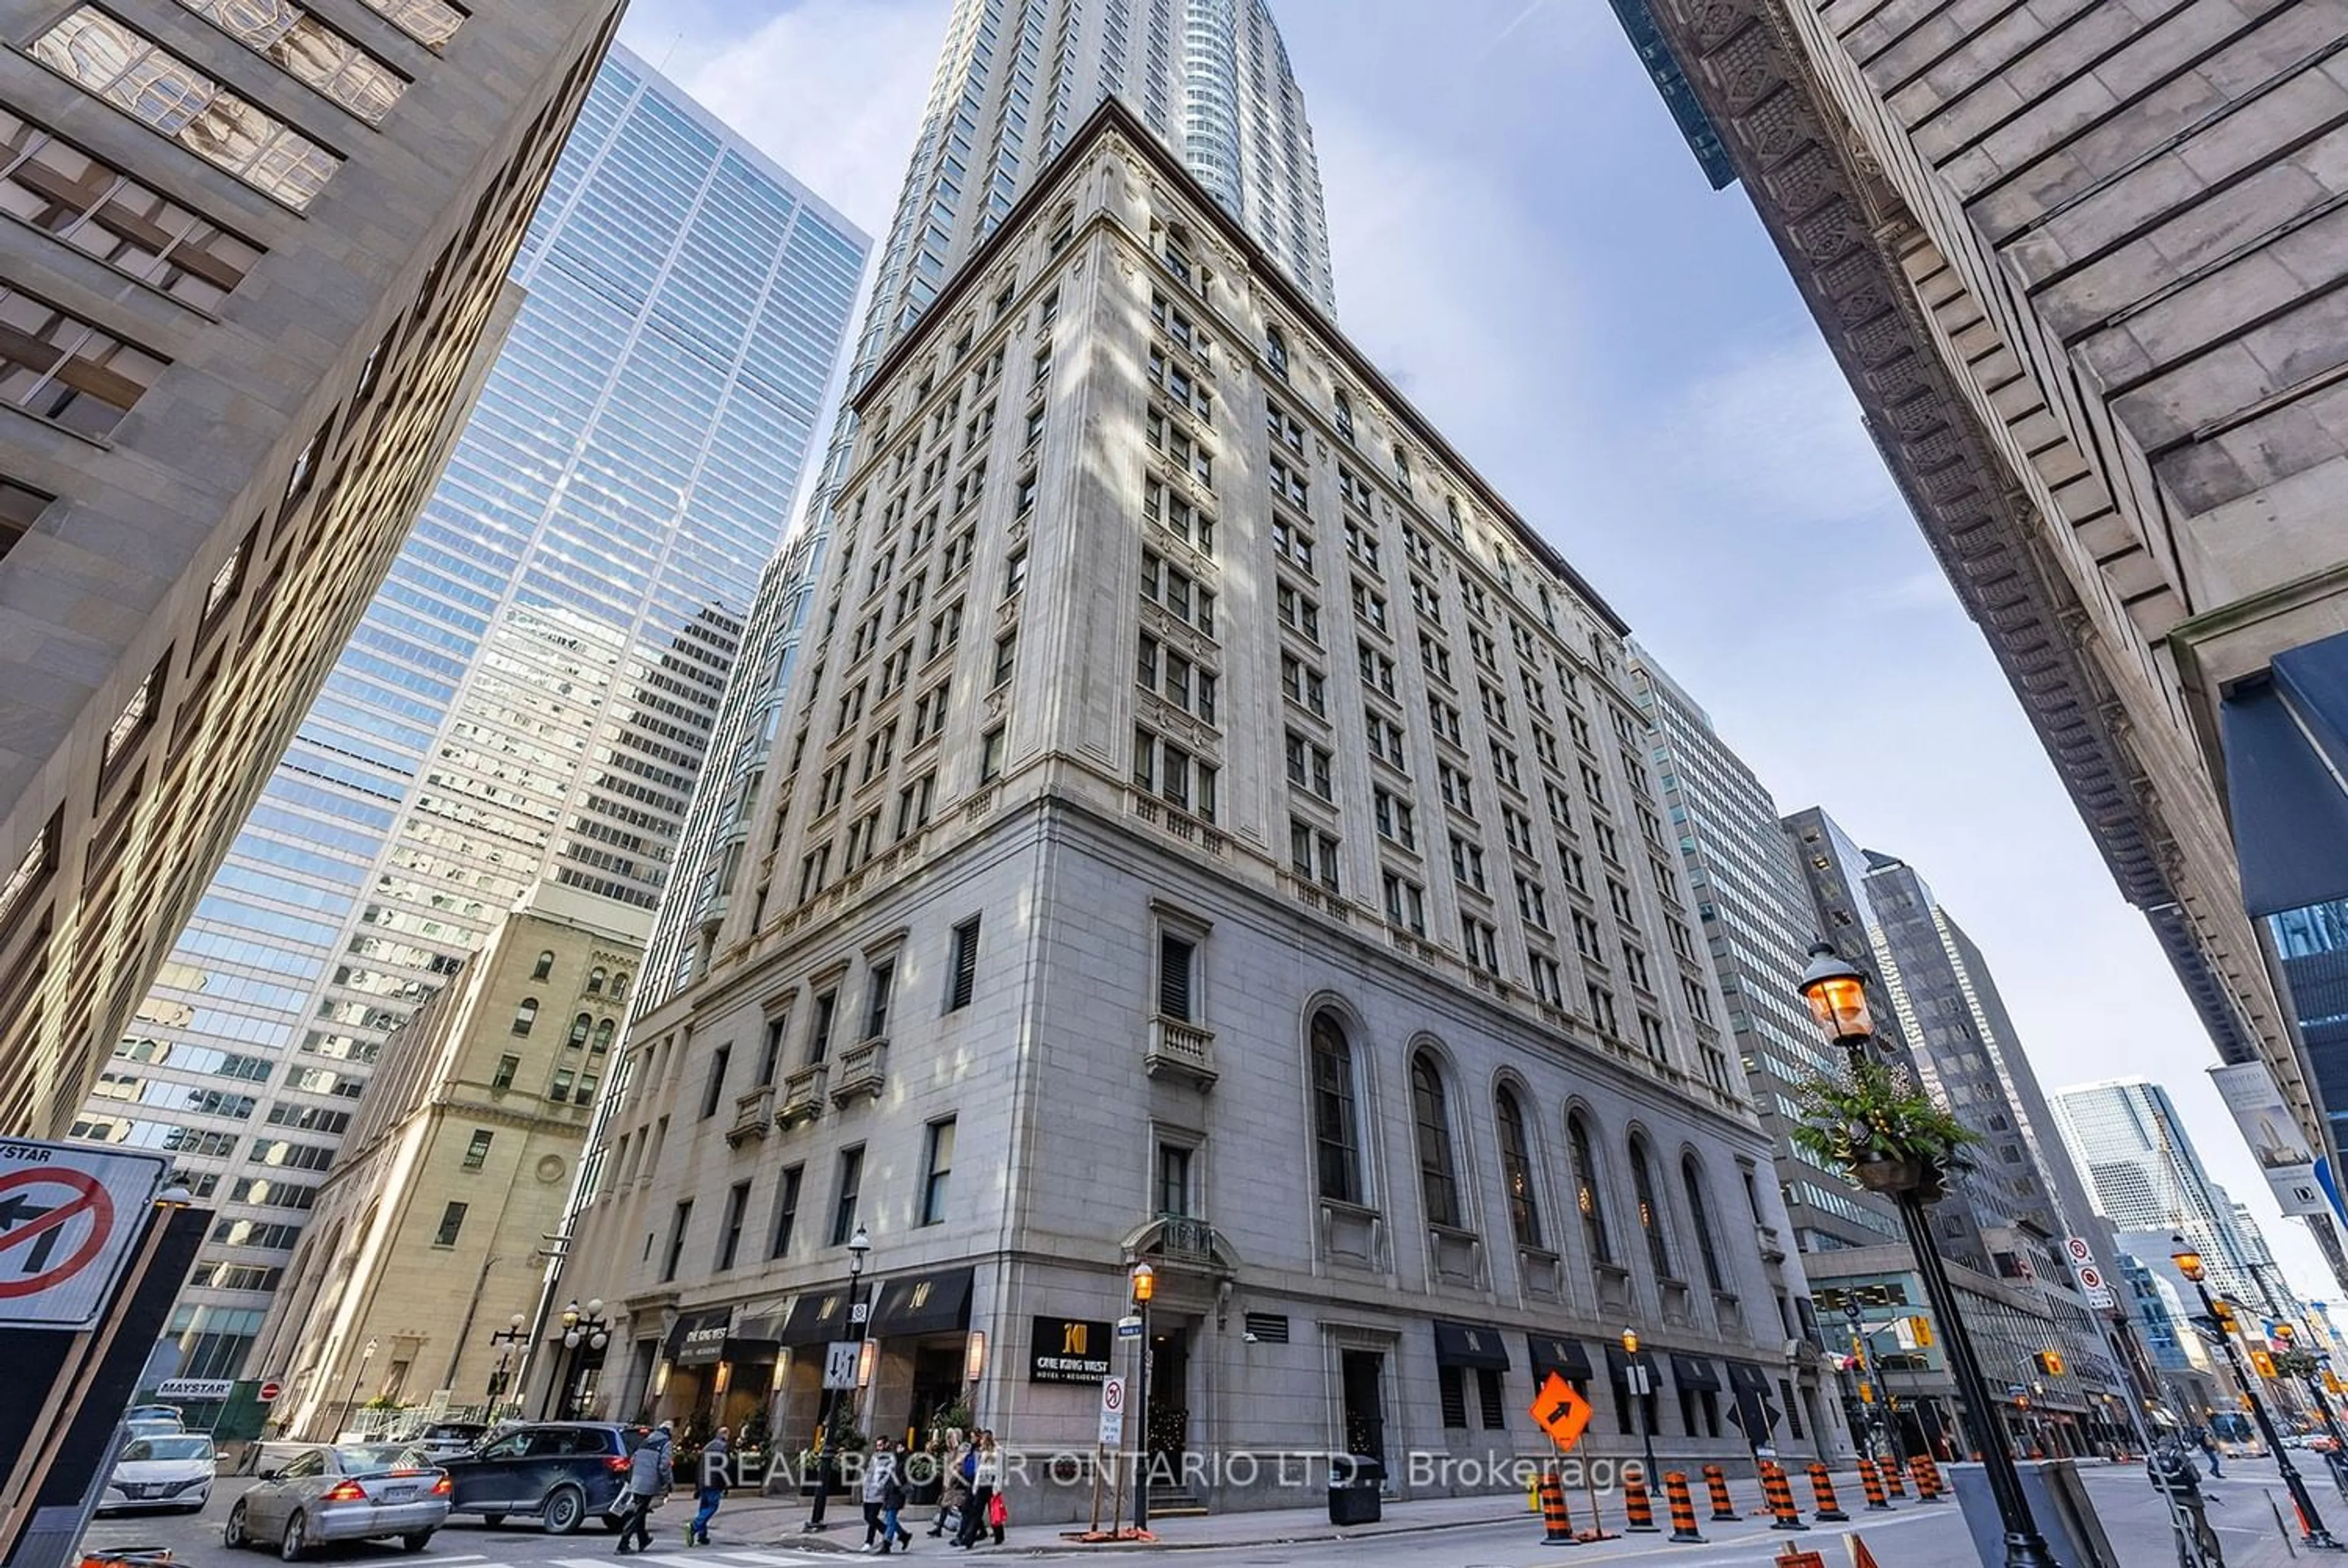 Street view for 1 King St #2509, Toronto Ontario M5H 1A1